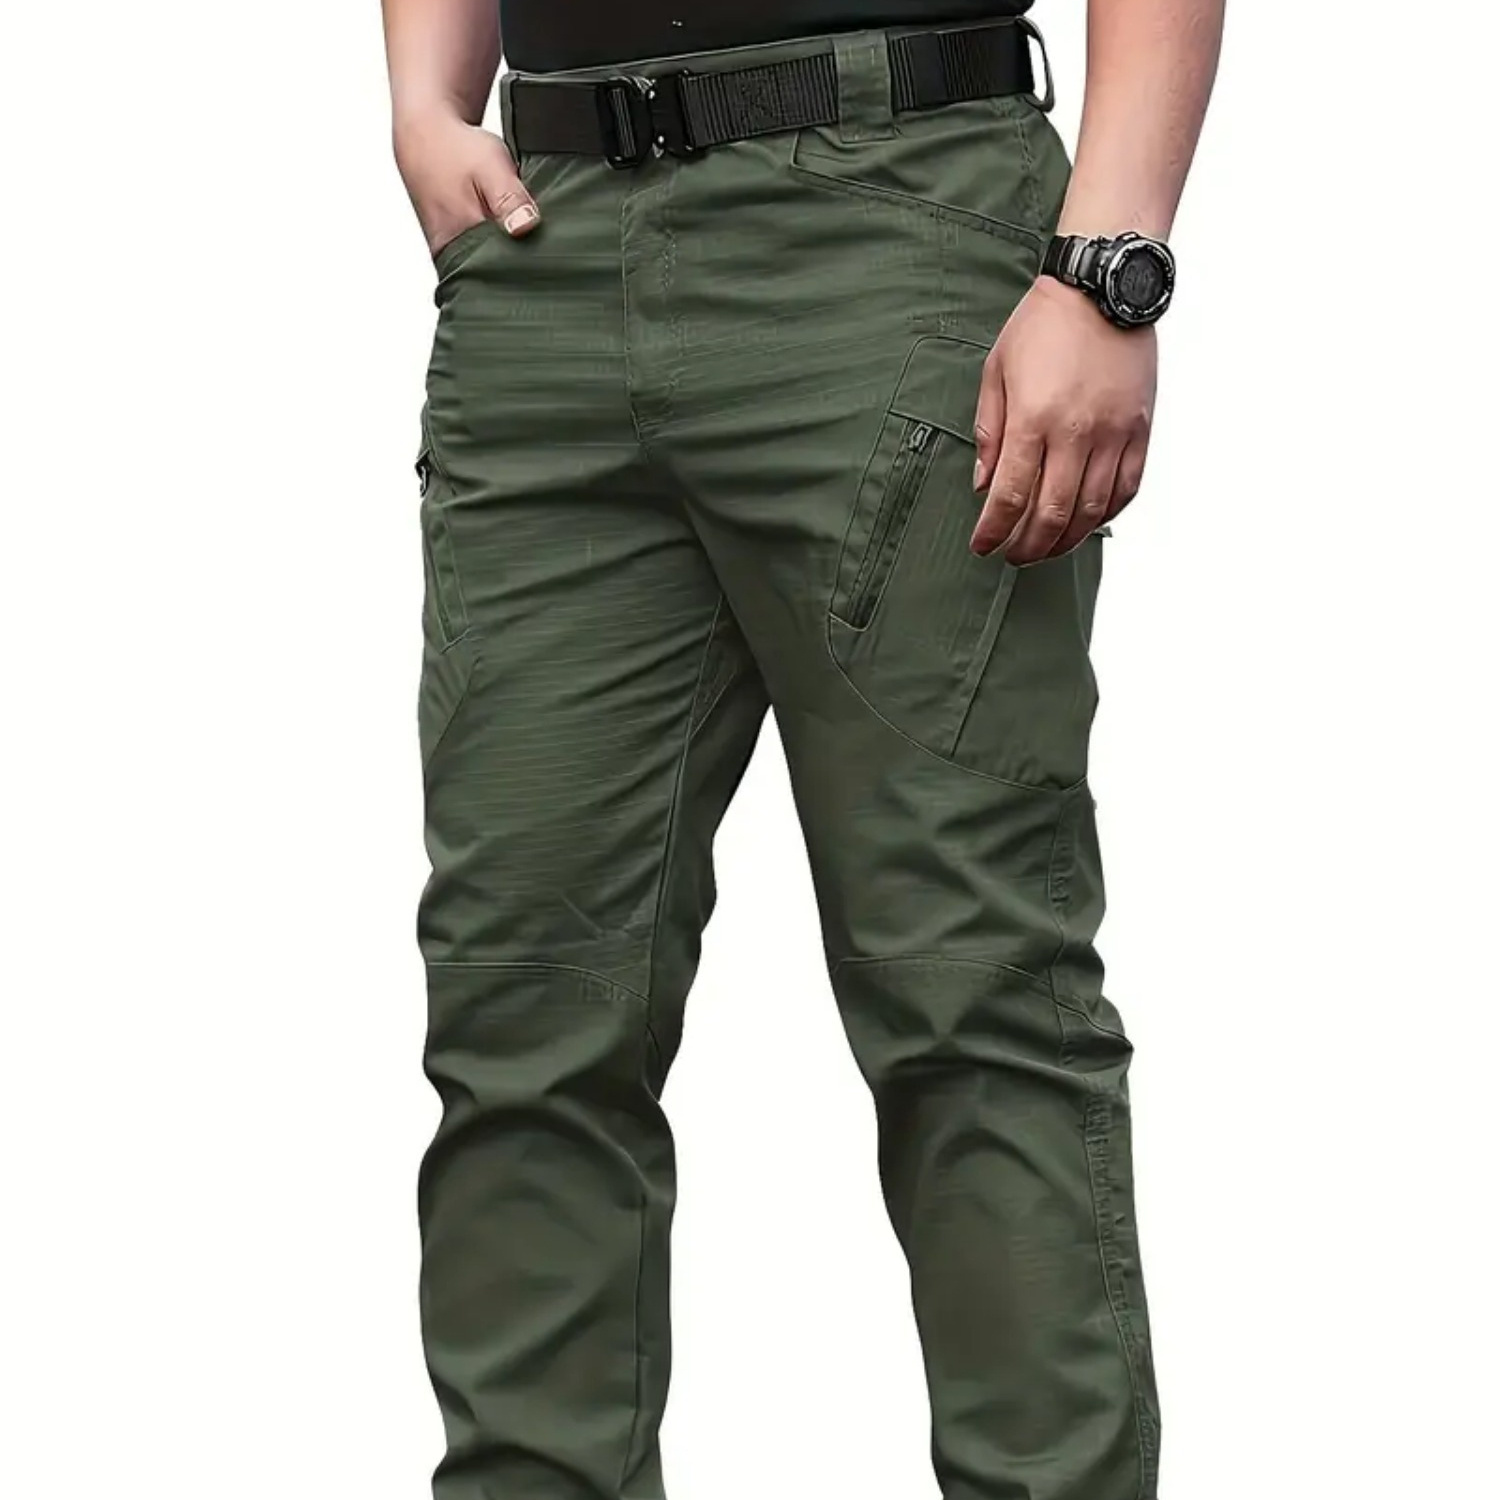 

Men's Solid High-performance Multi-functional Cargo Pants For Hiking Camping And Outdoor Working (belt Not Included)